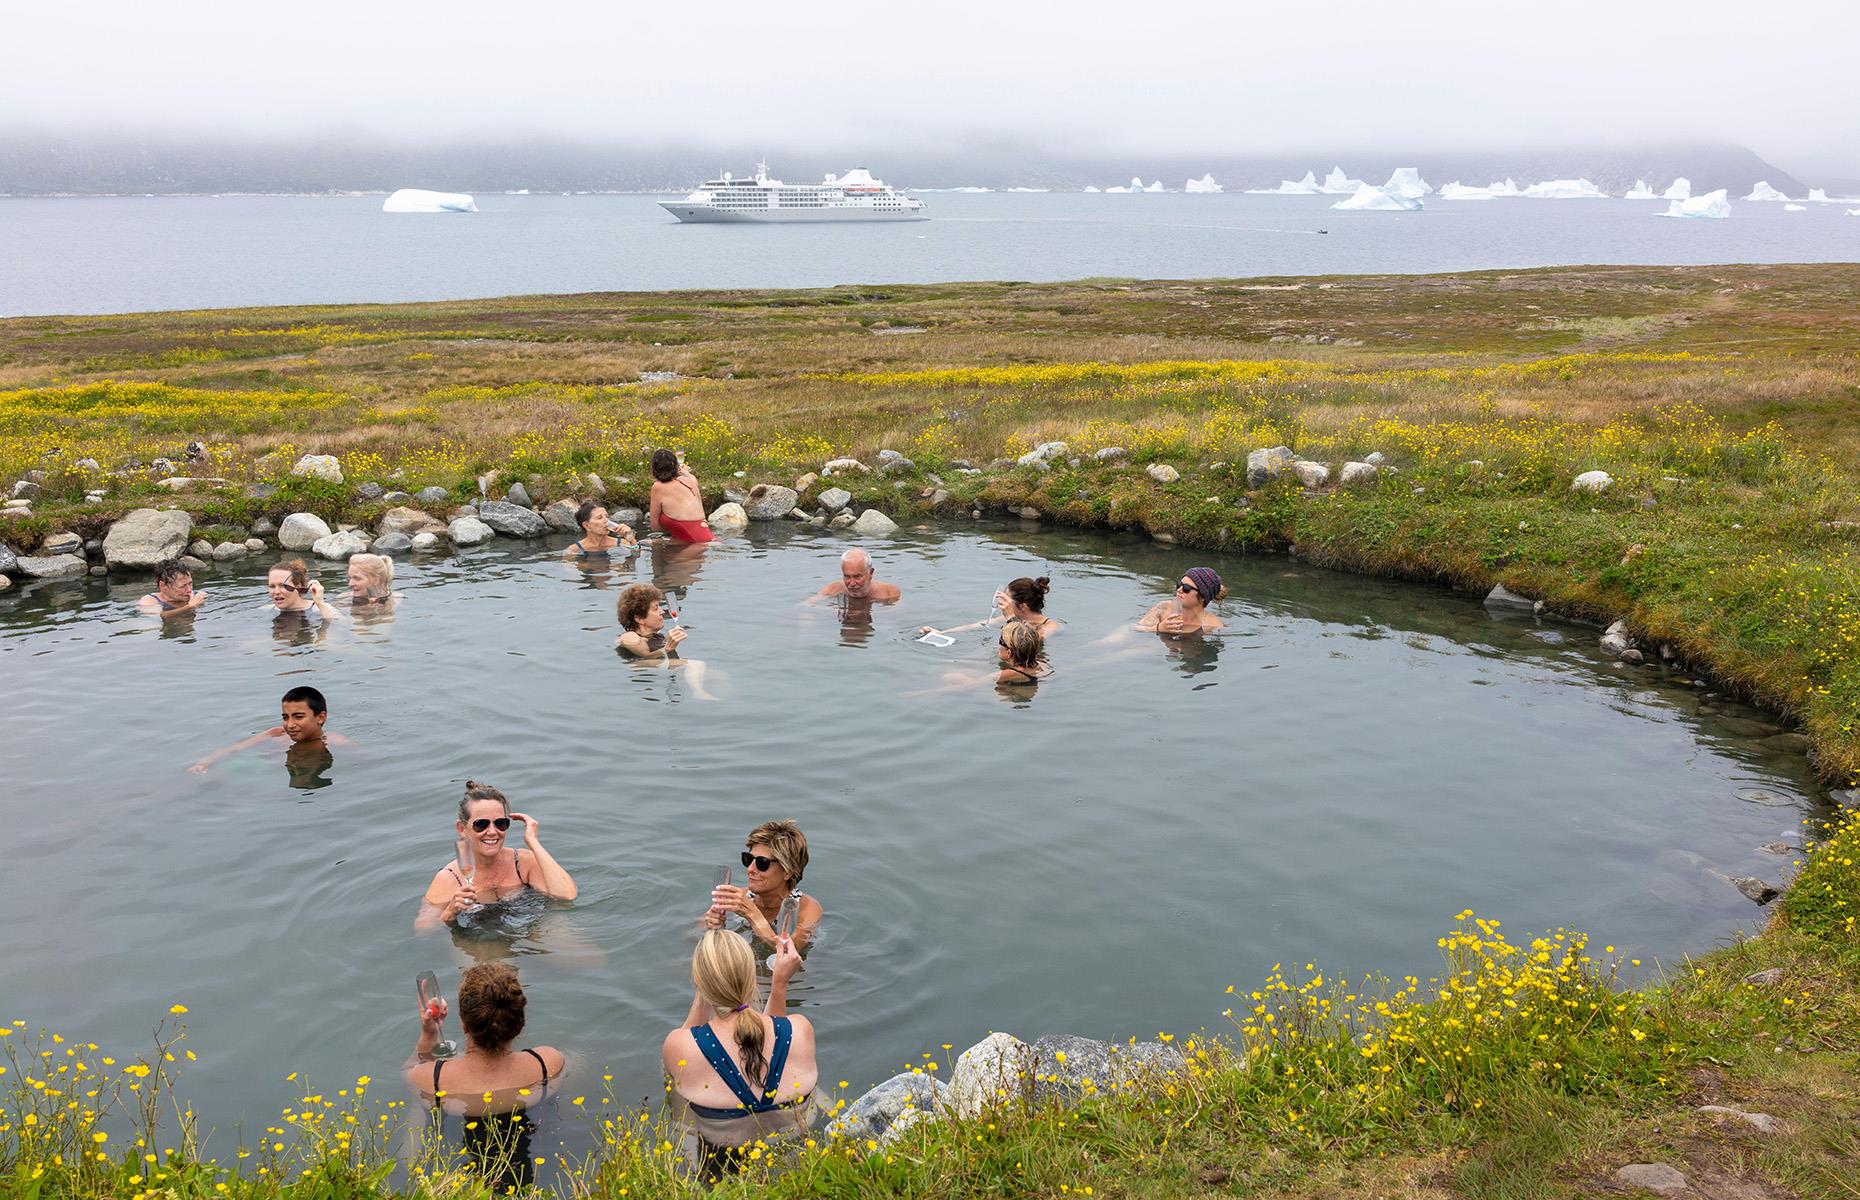 <p>While Greenland may be famed for its icy climate, the hot springs on the uninhabited island of Uunartoq are warm enough to bathe in year-round, with water temperatures ranging from 93-100°F. The isolated island can be reached by boat from the mainland towns of Qaqortoq and Nanortalik, and boasts peaceful surroundings and breathtaking views of mountain peaks and icebergs as far as the eye can see.</p>